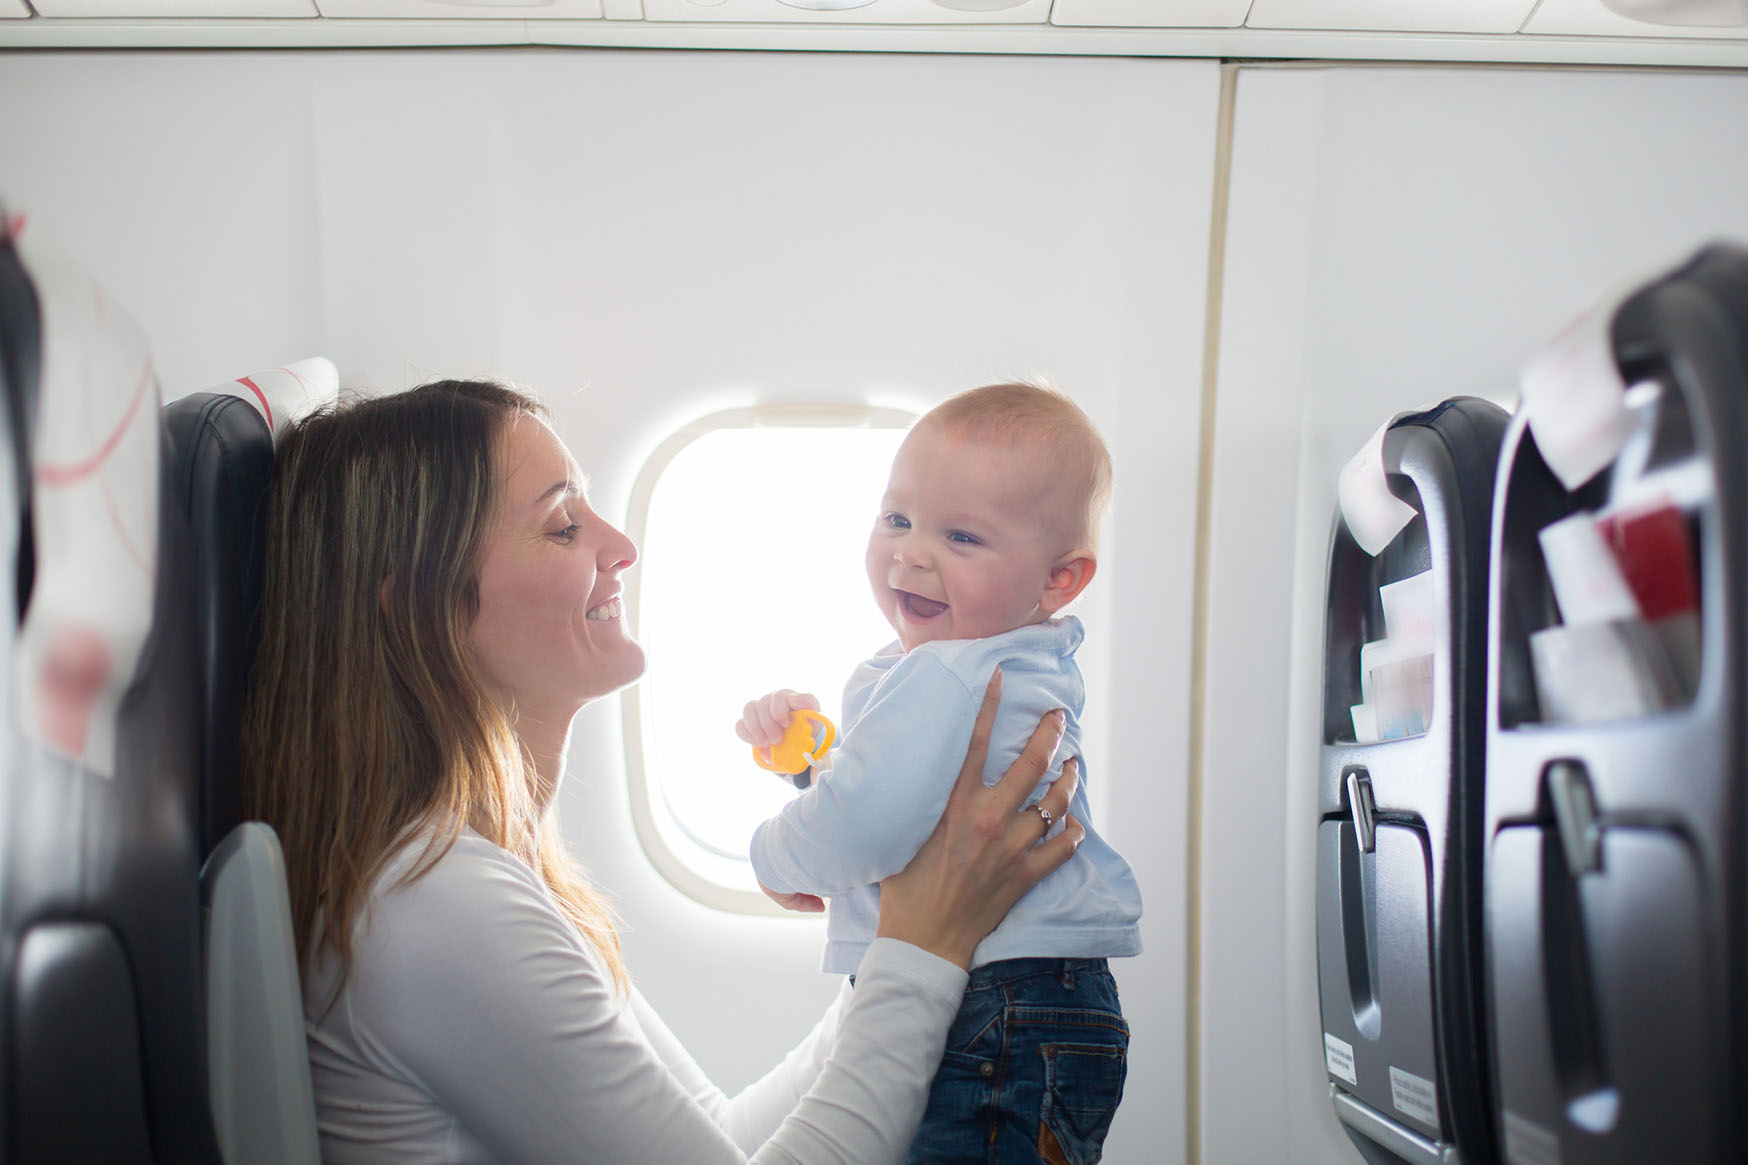 Flying With A Baby Travel Essentials and Flying With A Toddler